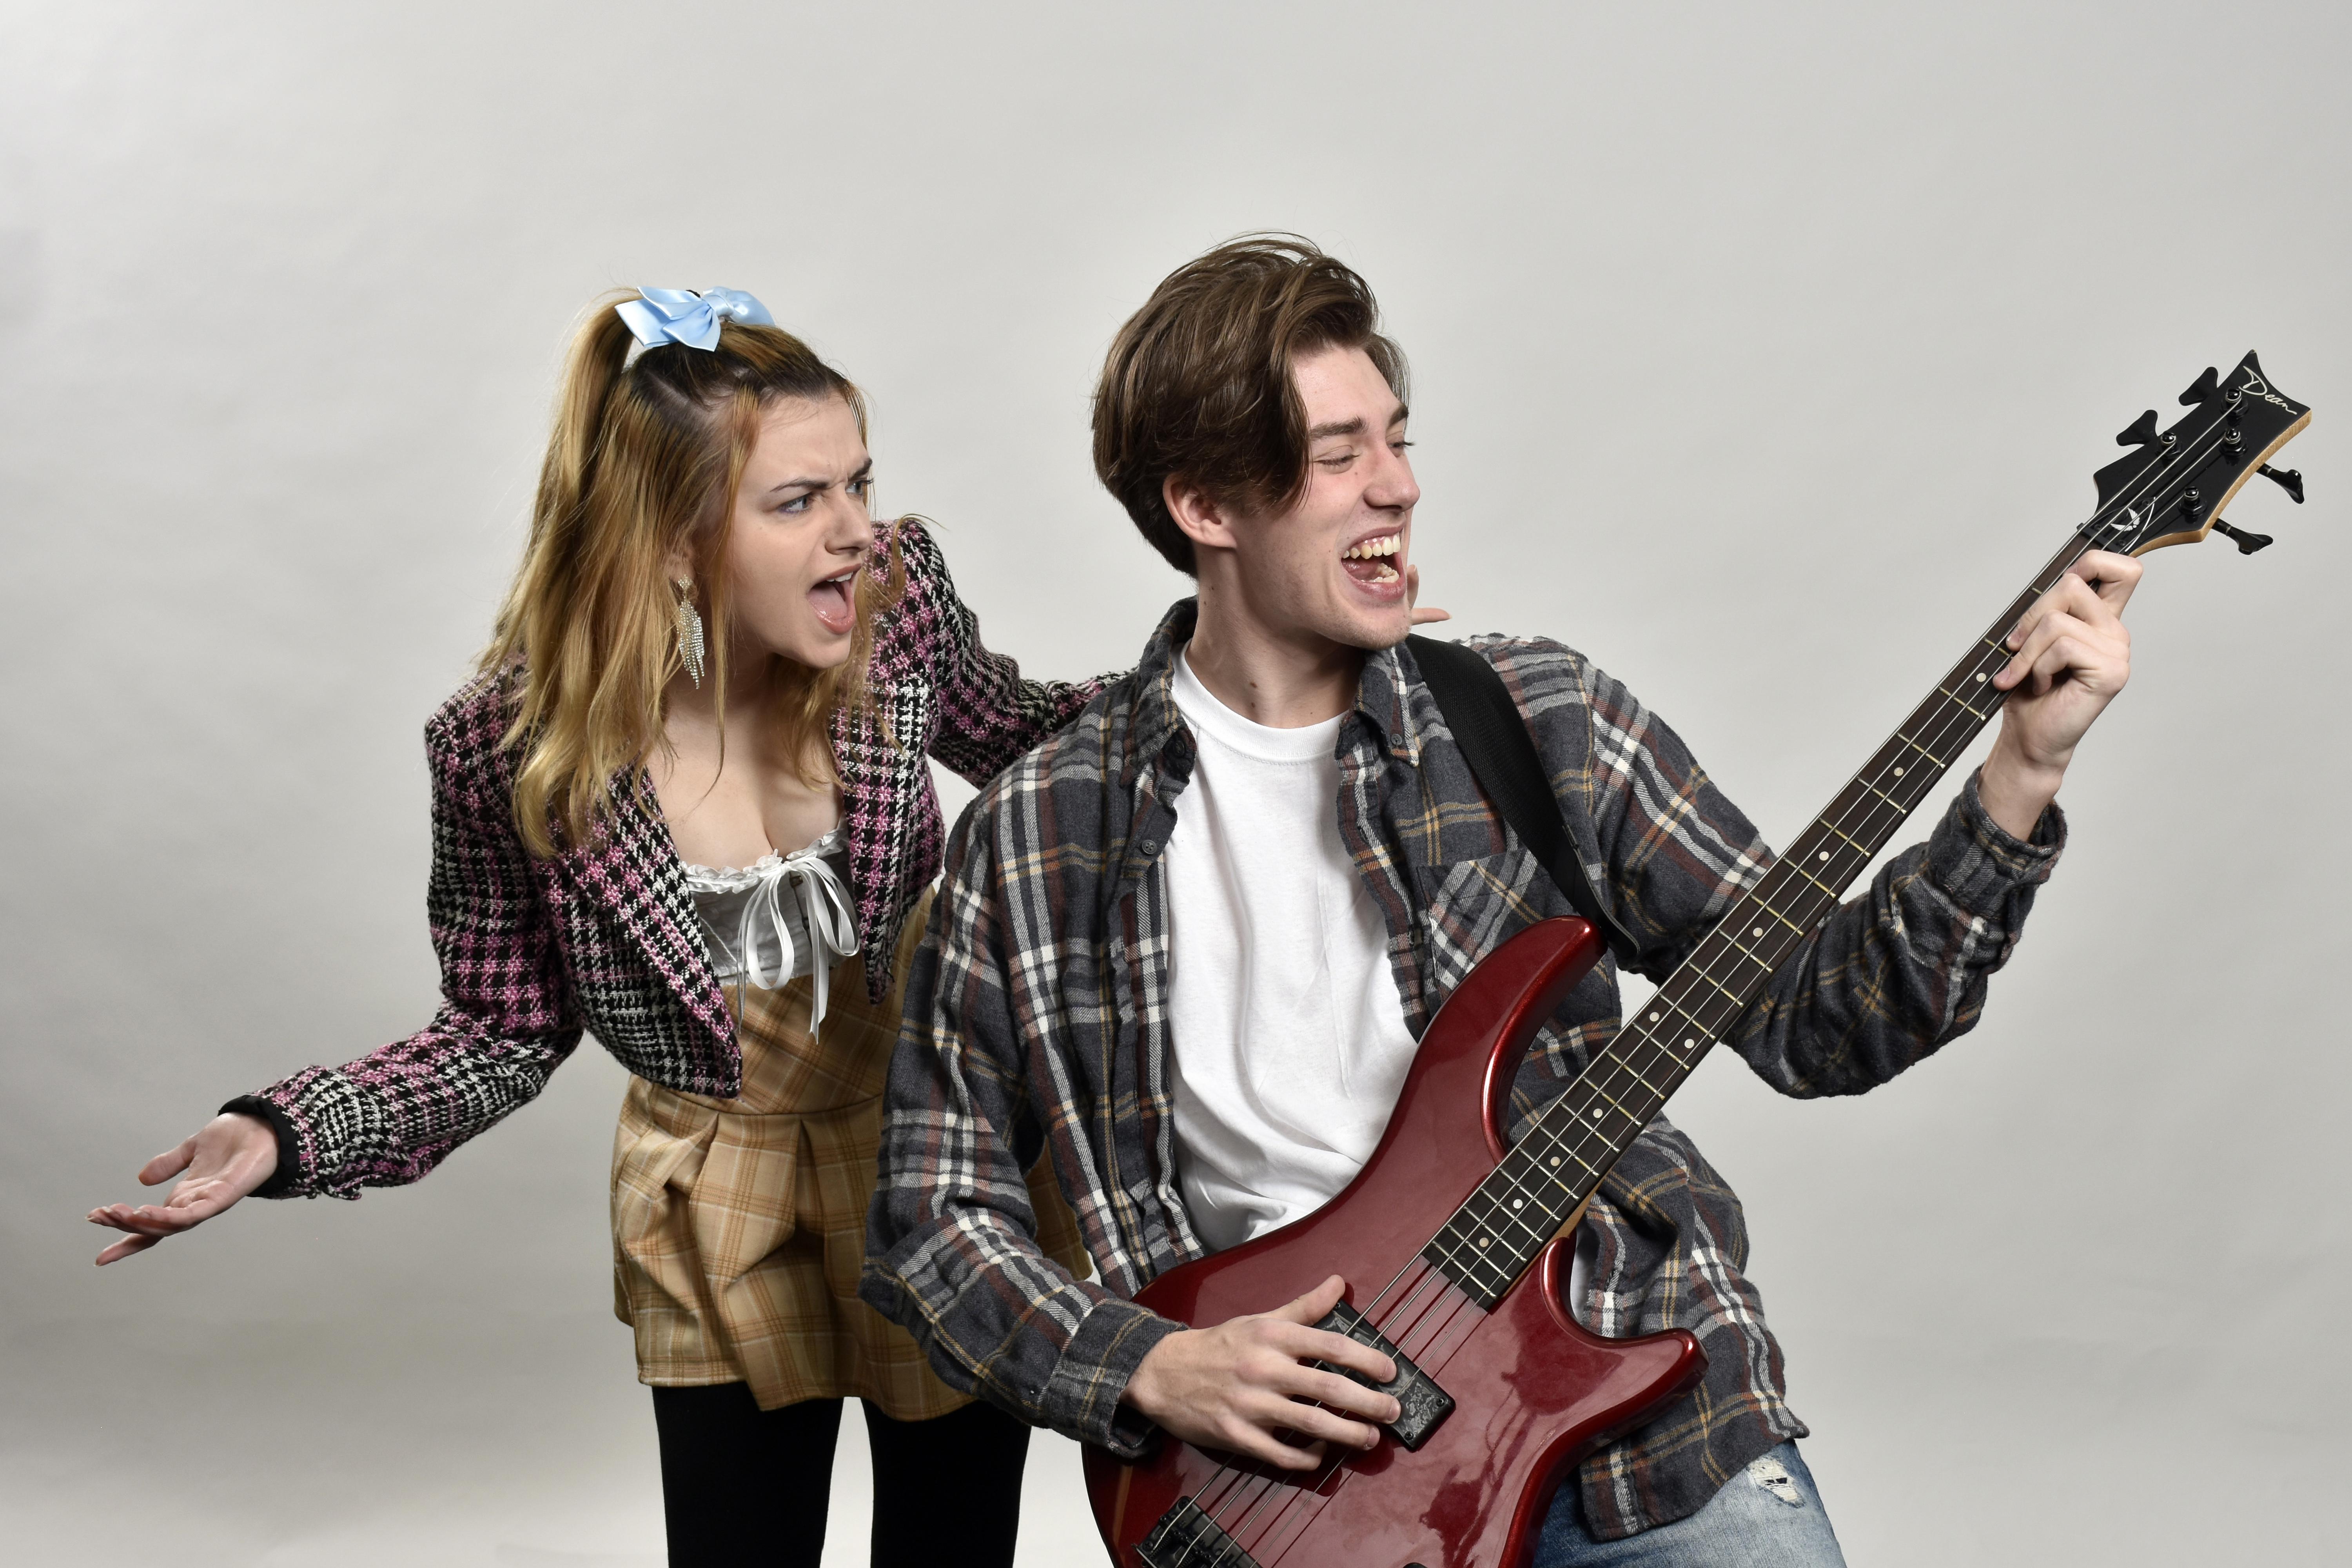 Rachel Leotta, at left, and Brock Whaley, at right playing a bass, are among the ensemble cast of The Wedding Singer